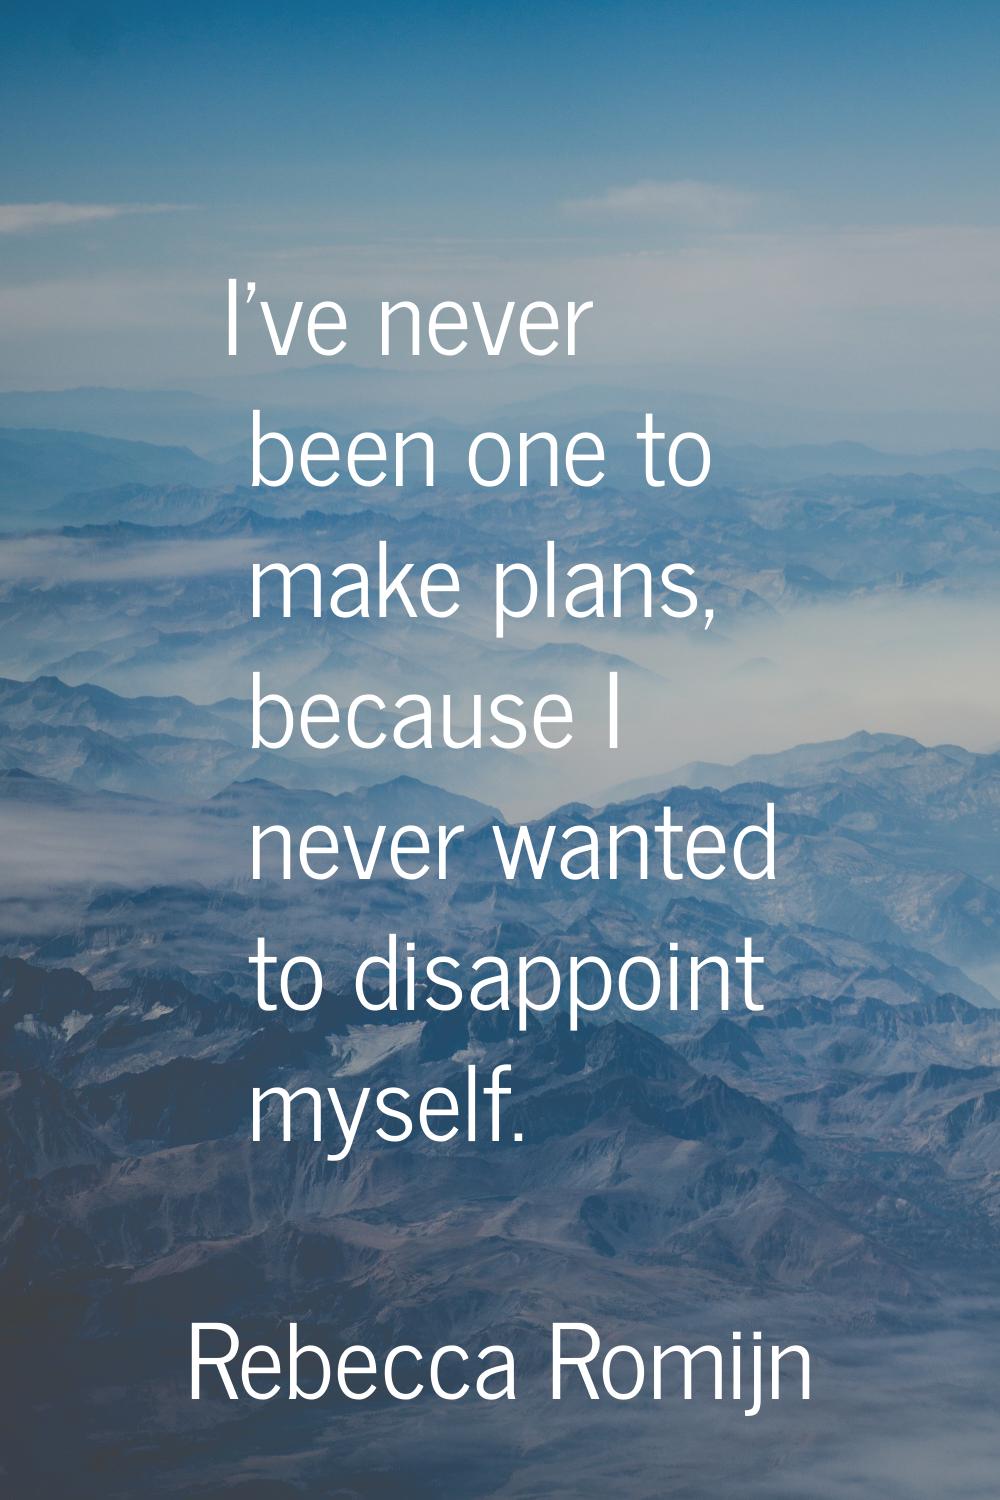 I've never been one to make plans, because I never wanted to disappoint myself.